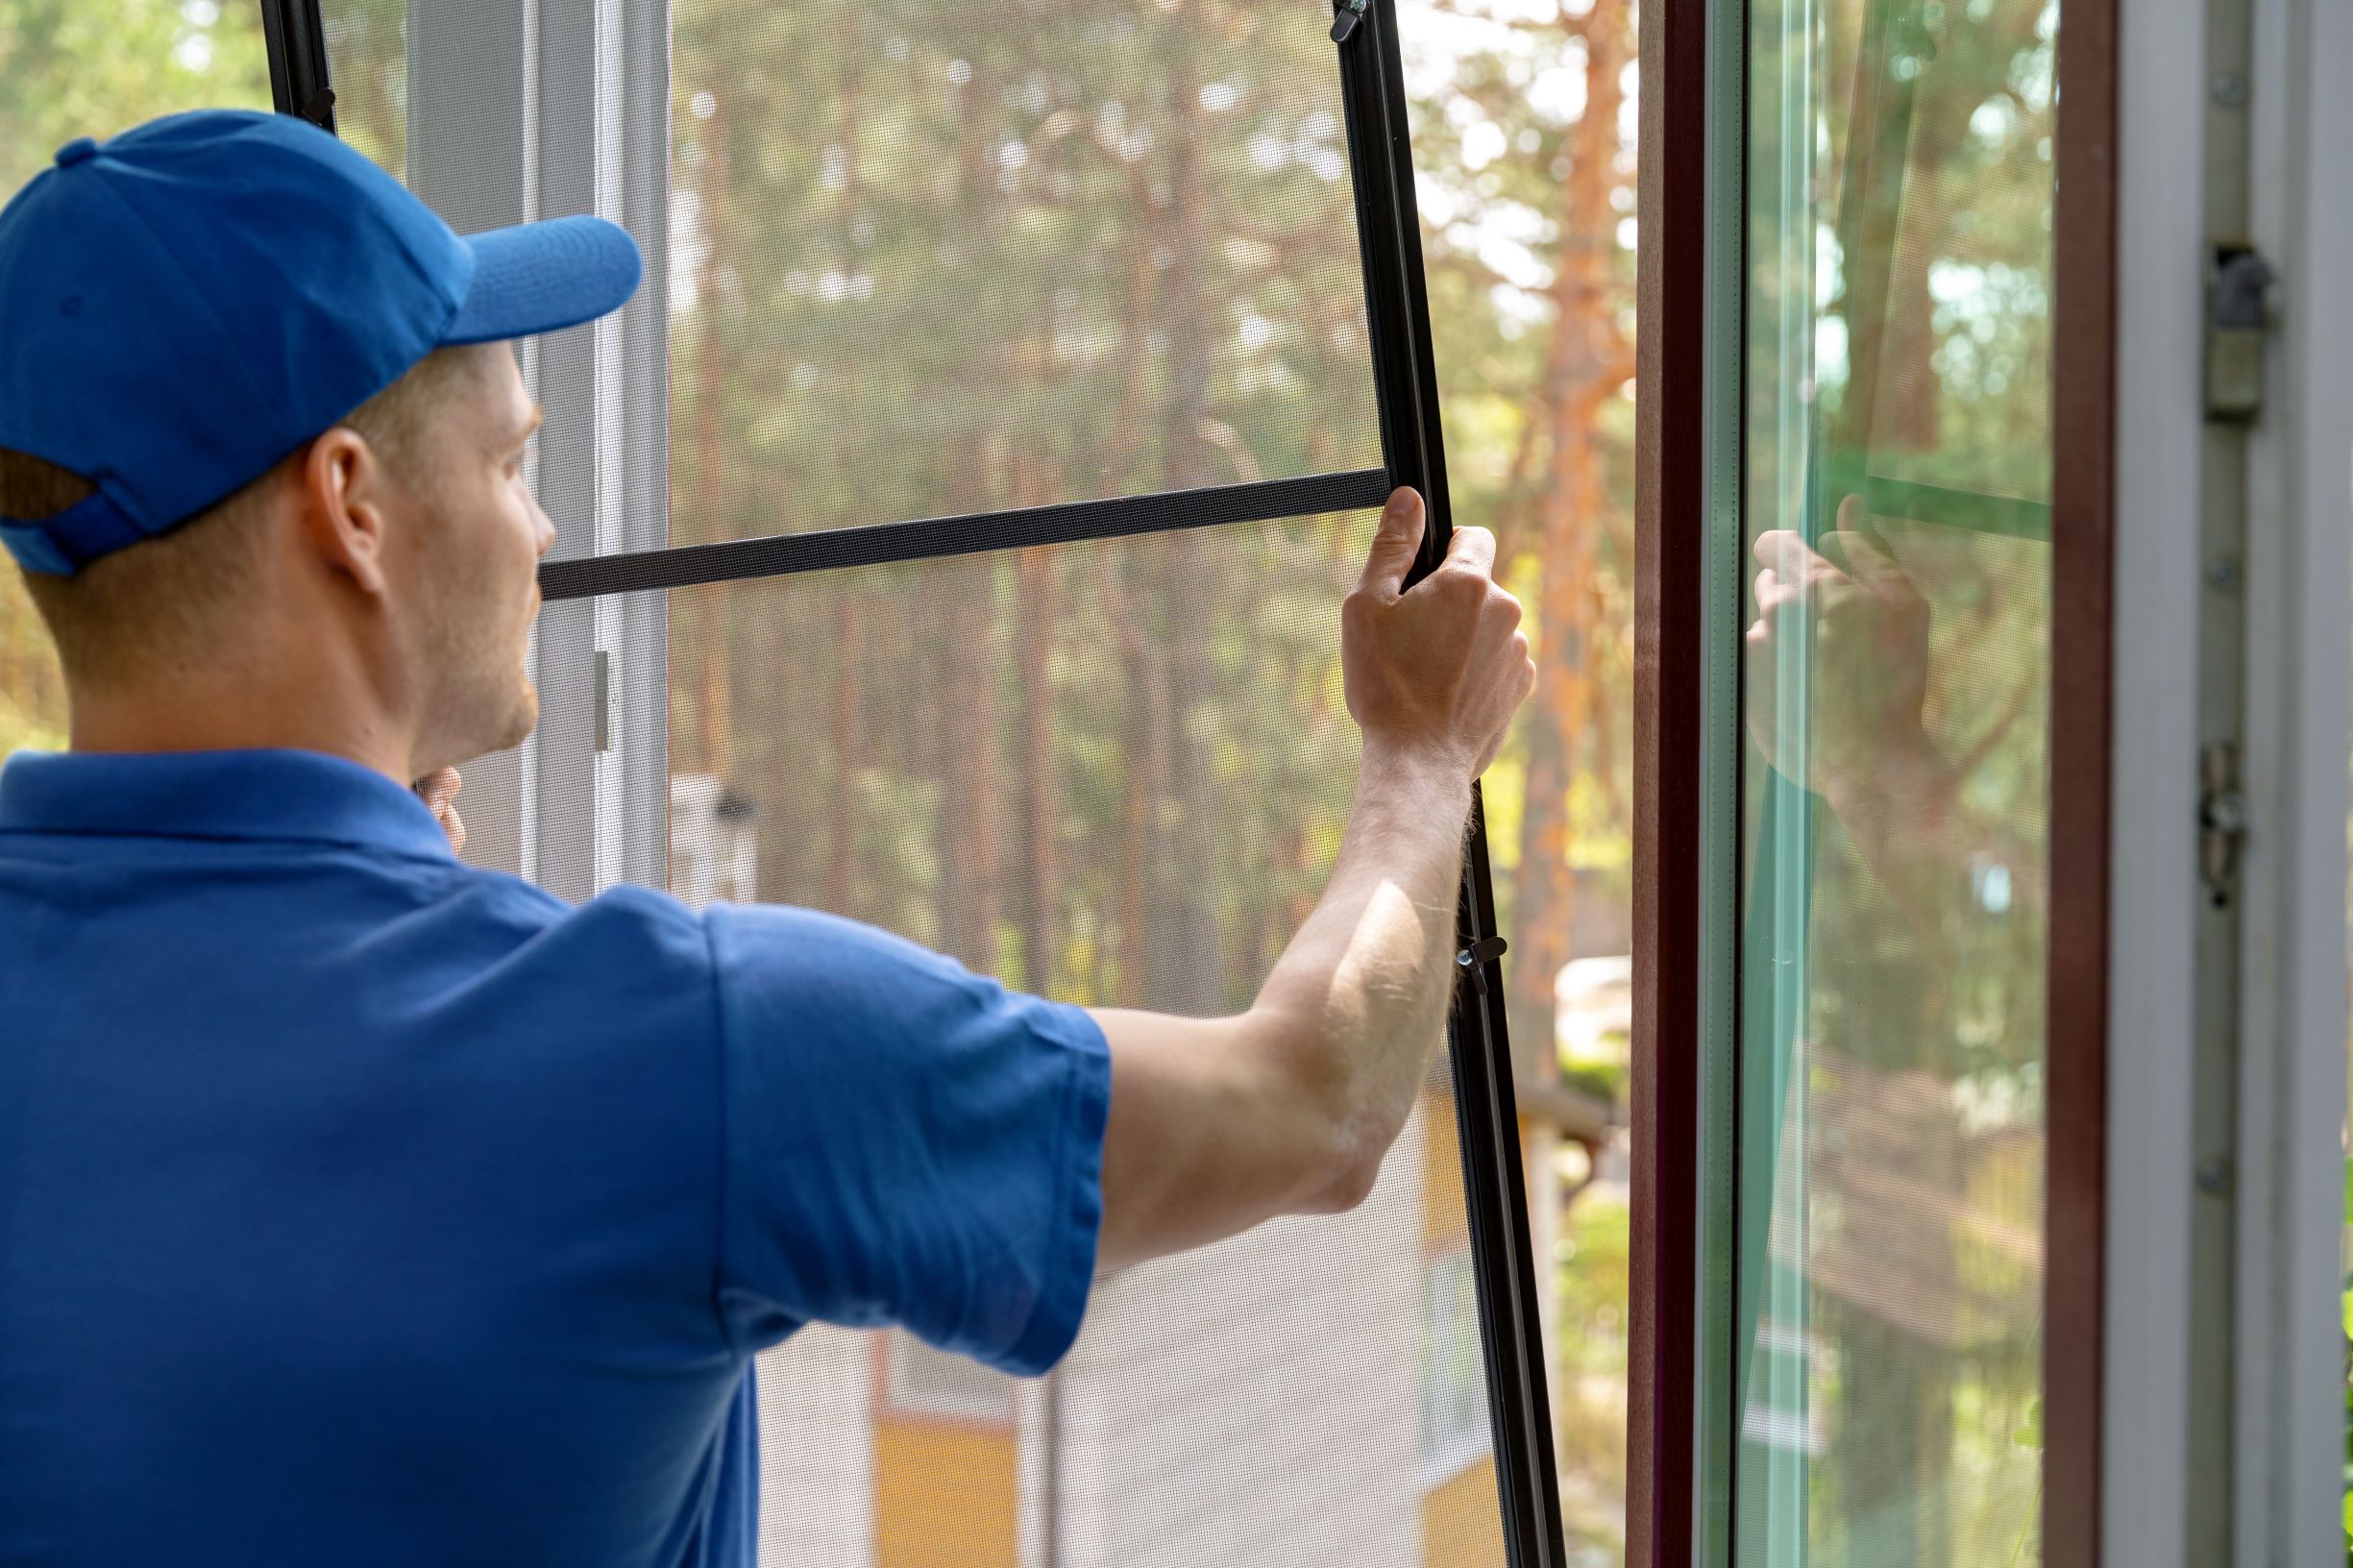 Here are a few tips to help you find the best window installation company in Michigan for your needs. In this image, a man is removing or placing a window screen.